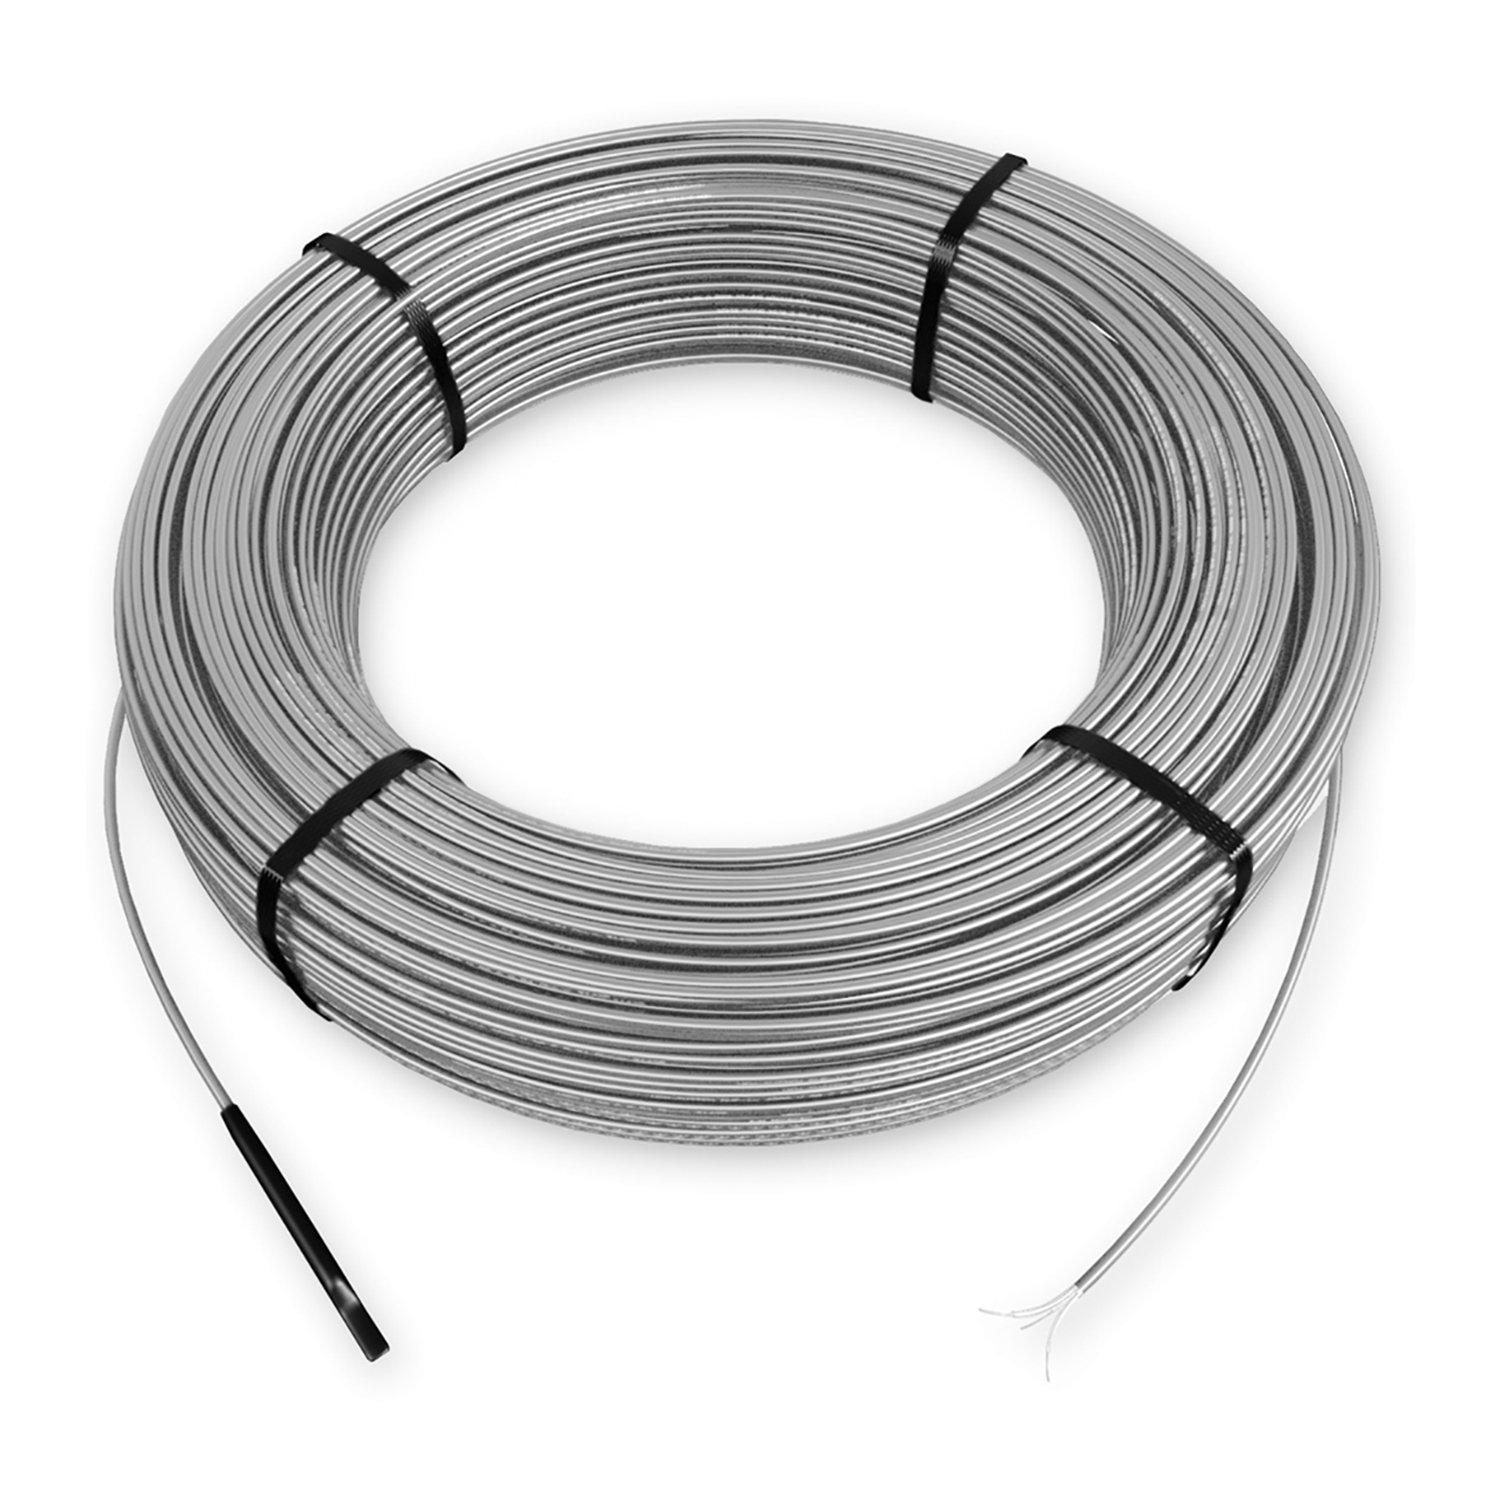 Schluter 16sqft. Ditra Heat 120V Heating Cable